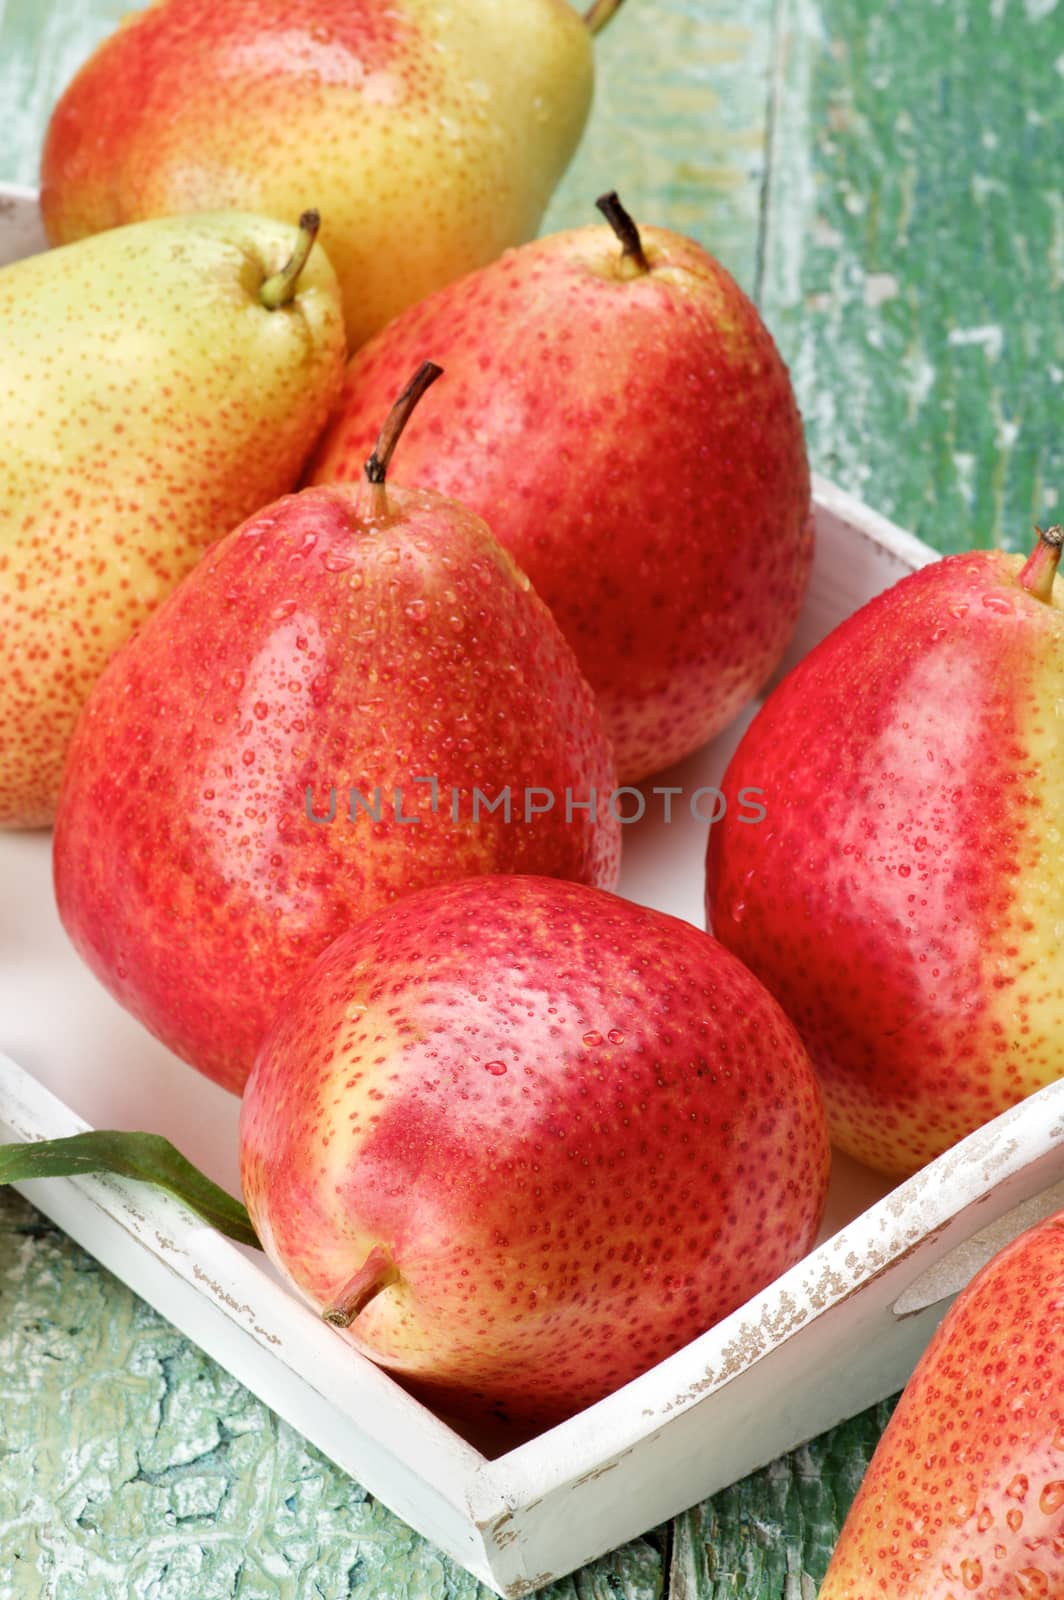 Ripe Yellow and Red Pears in White Wooden Tray Cross Section on Cracked Wooden background